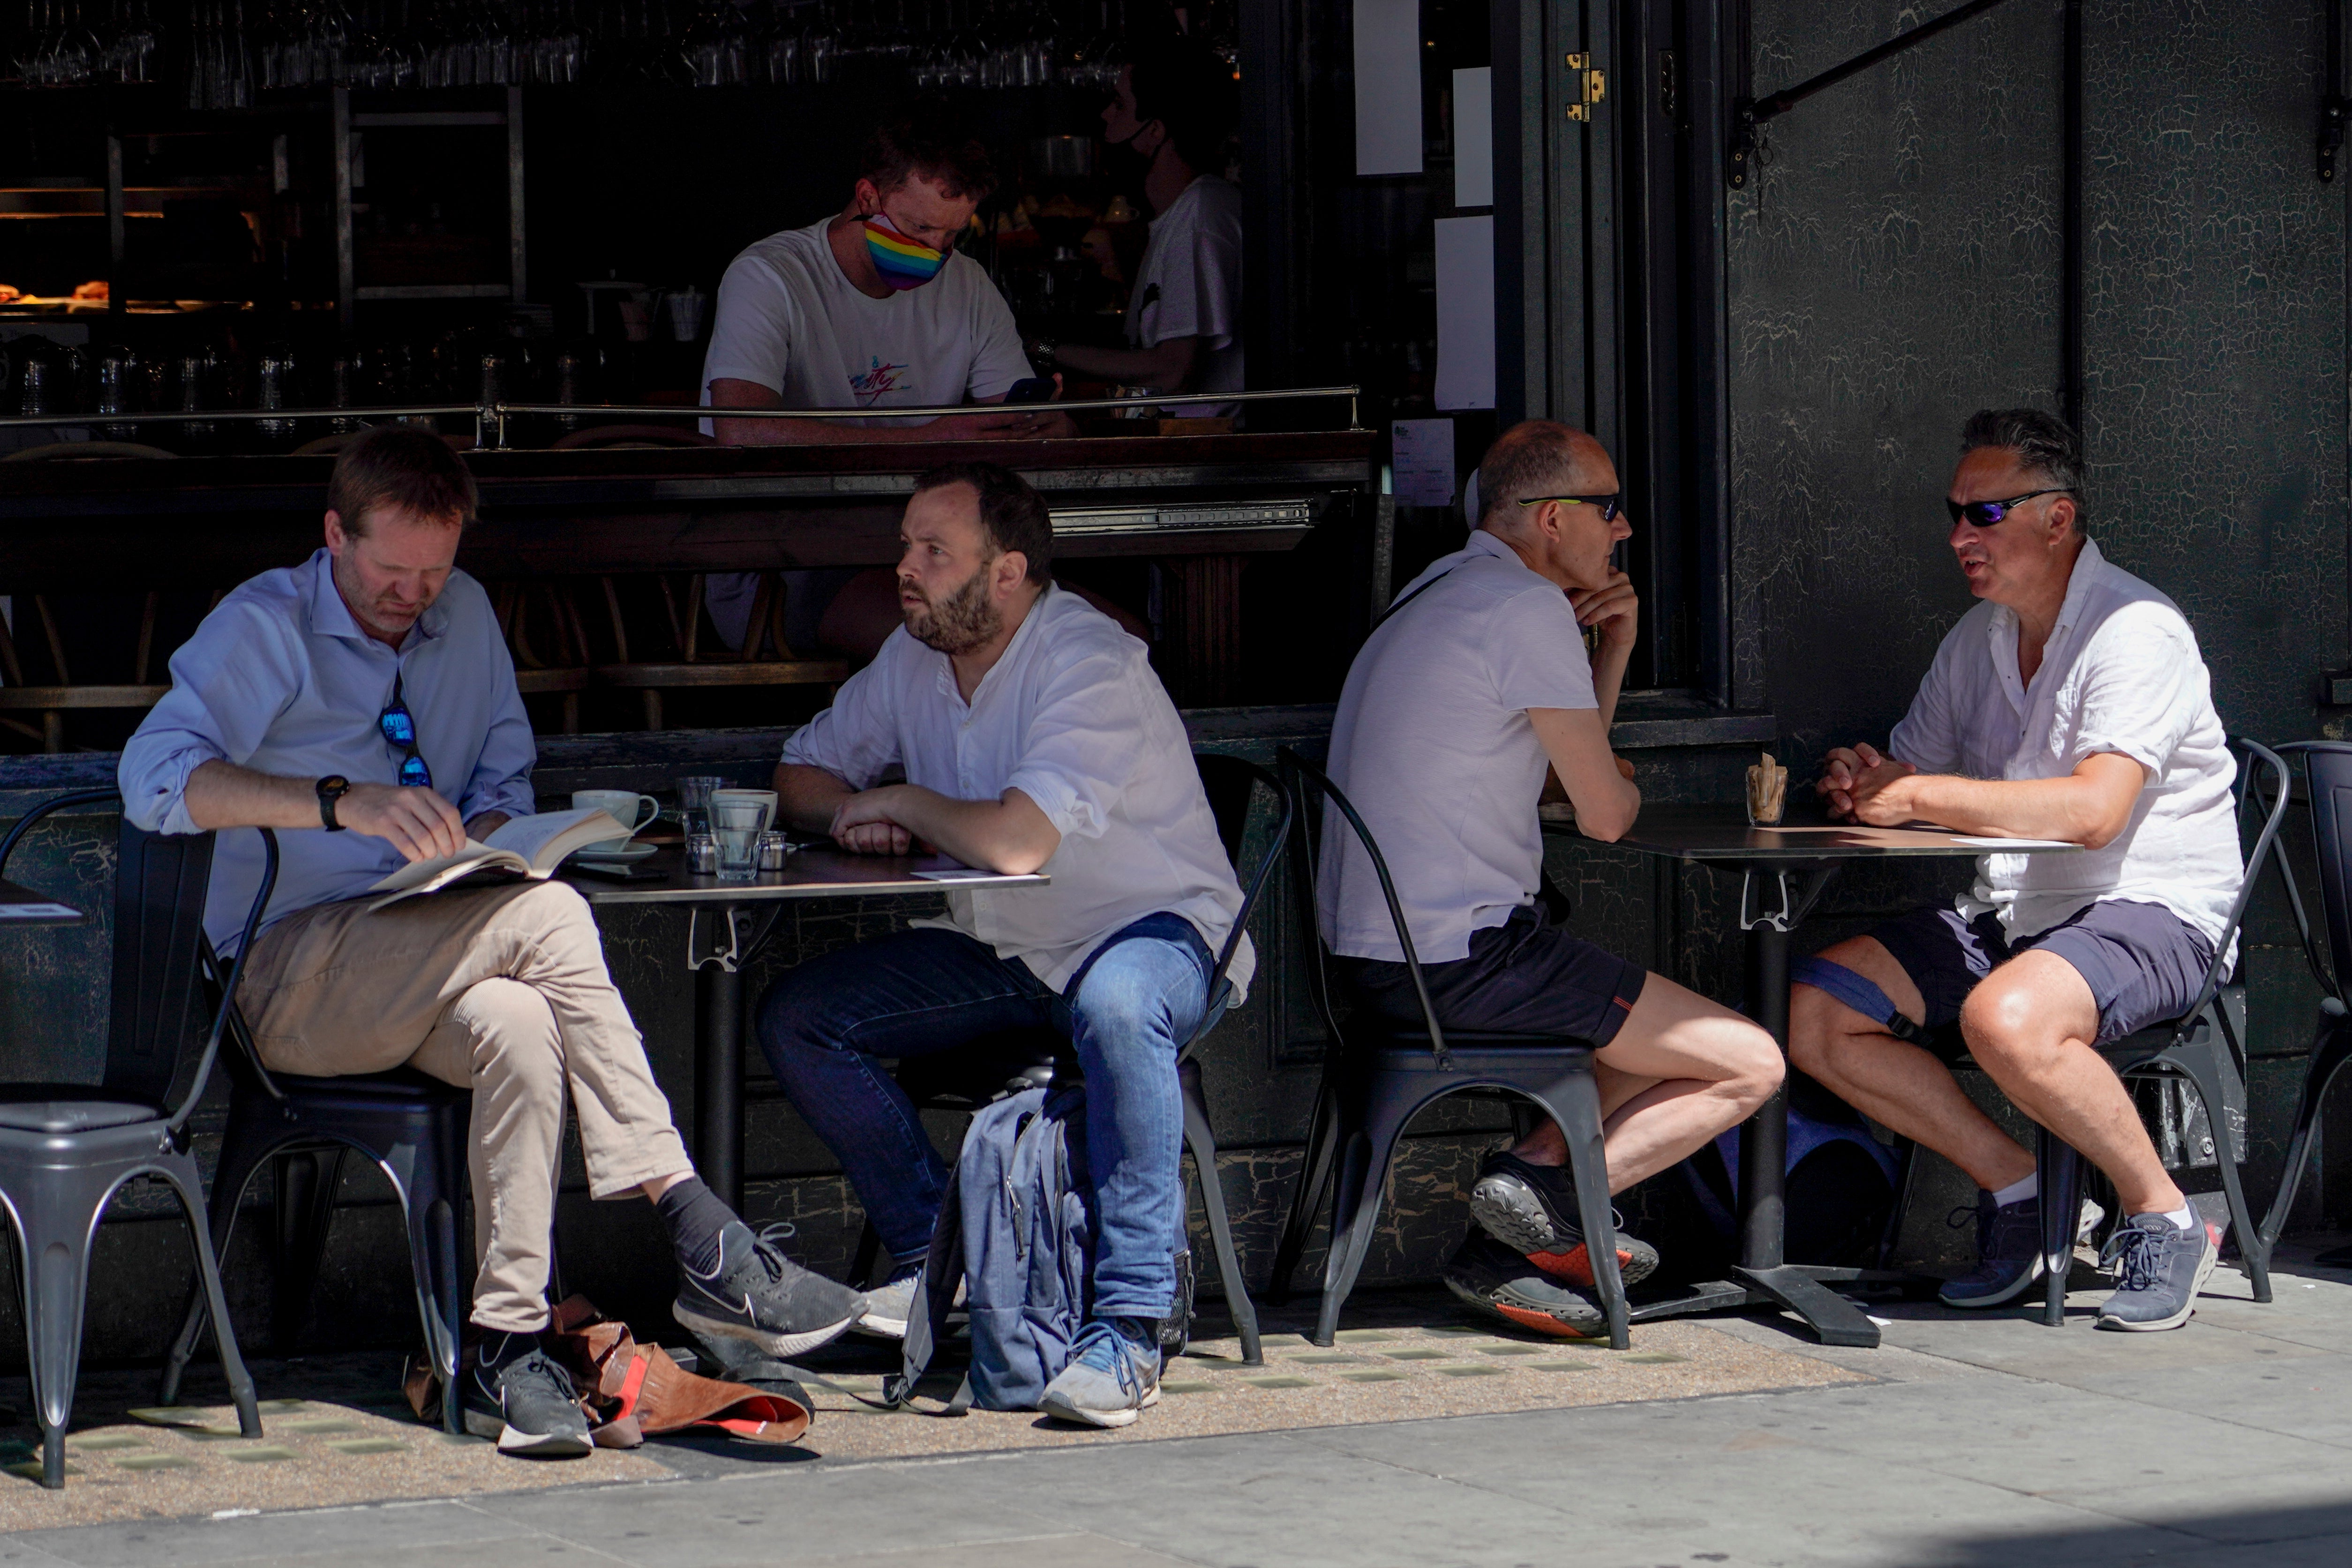 People sit at outdoor tables at a restaurant in Soho, in London, last week